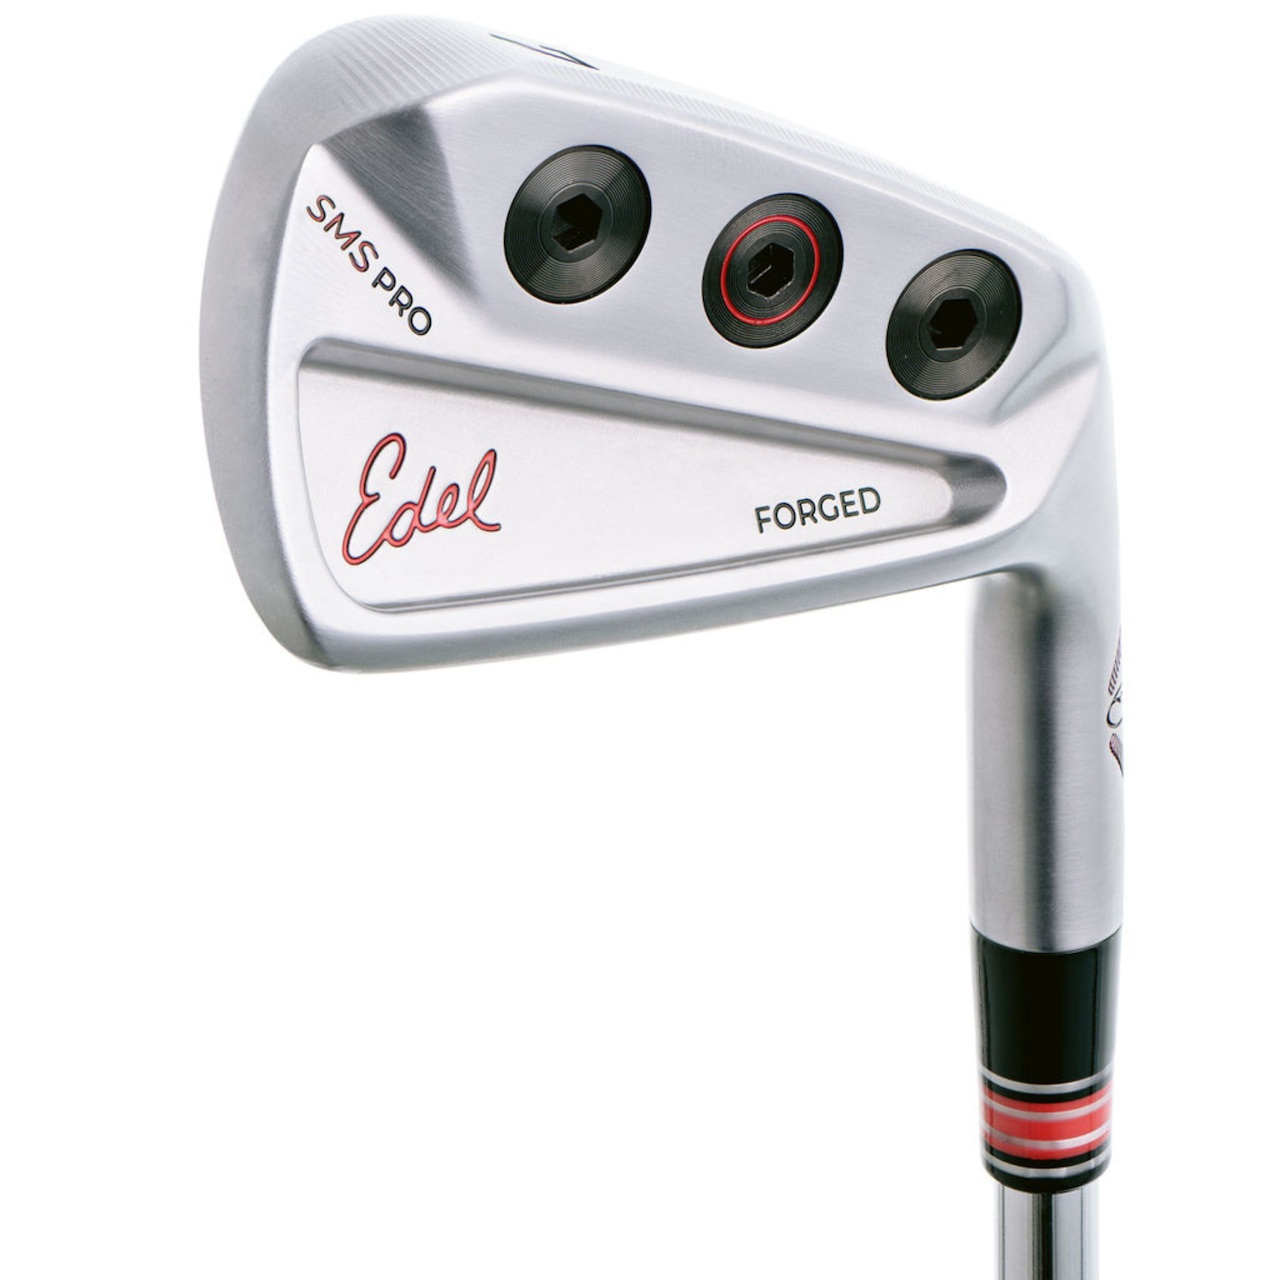 Edel Golf SMS Pro Irons